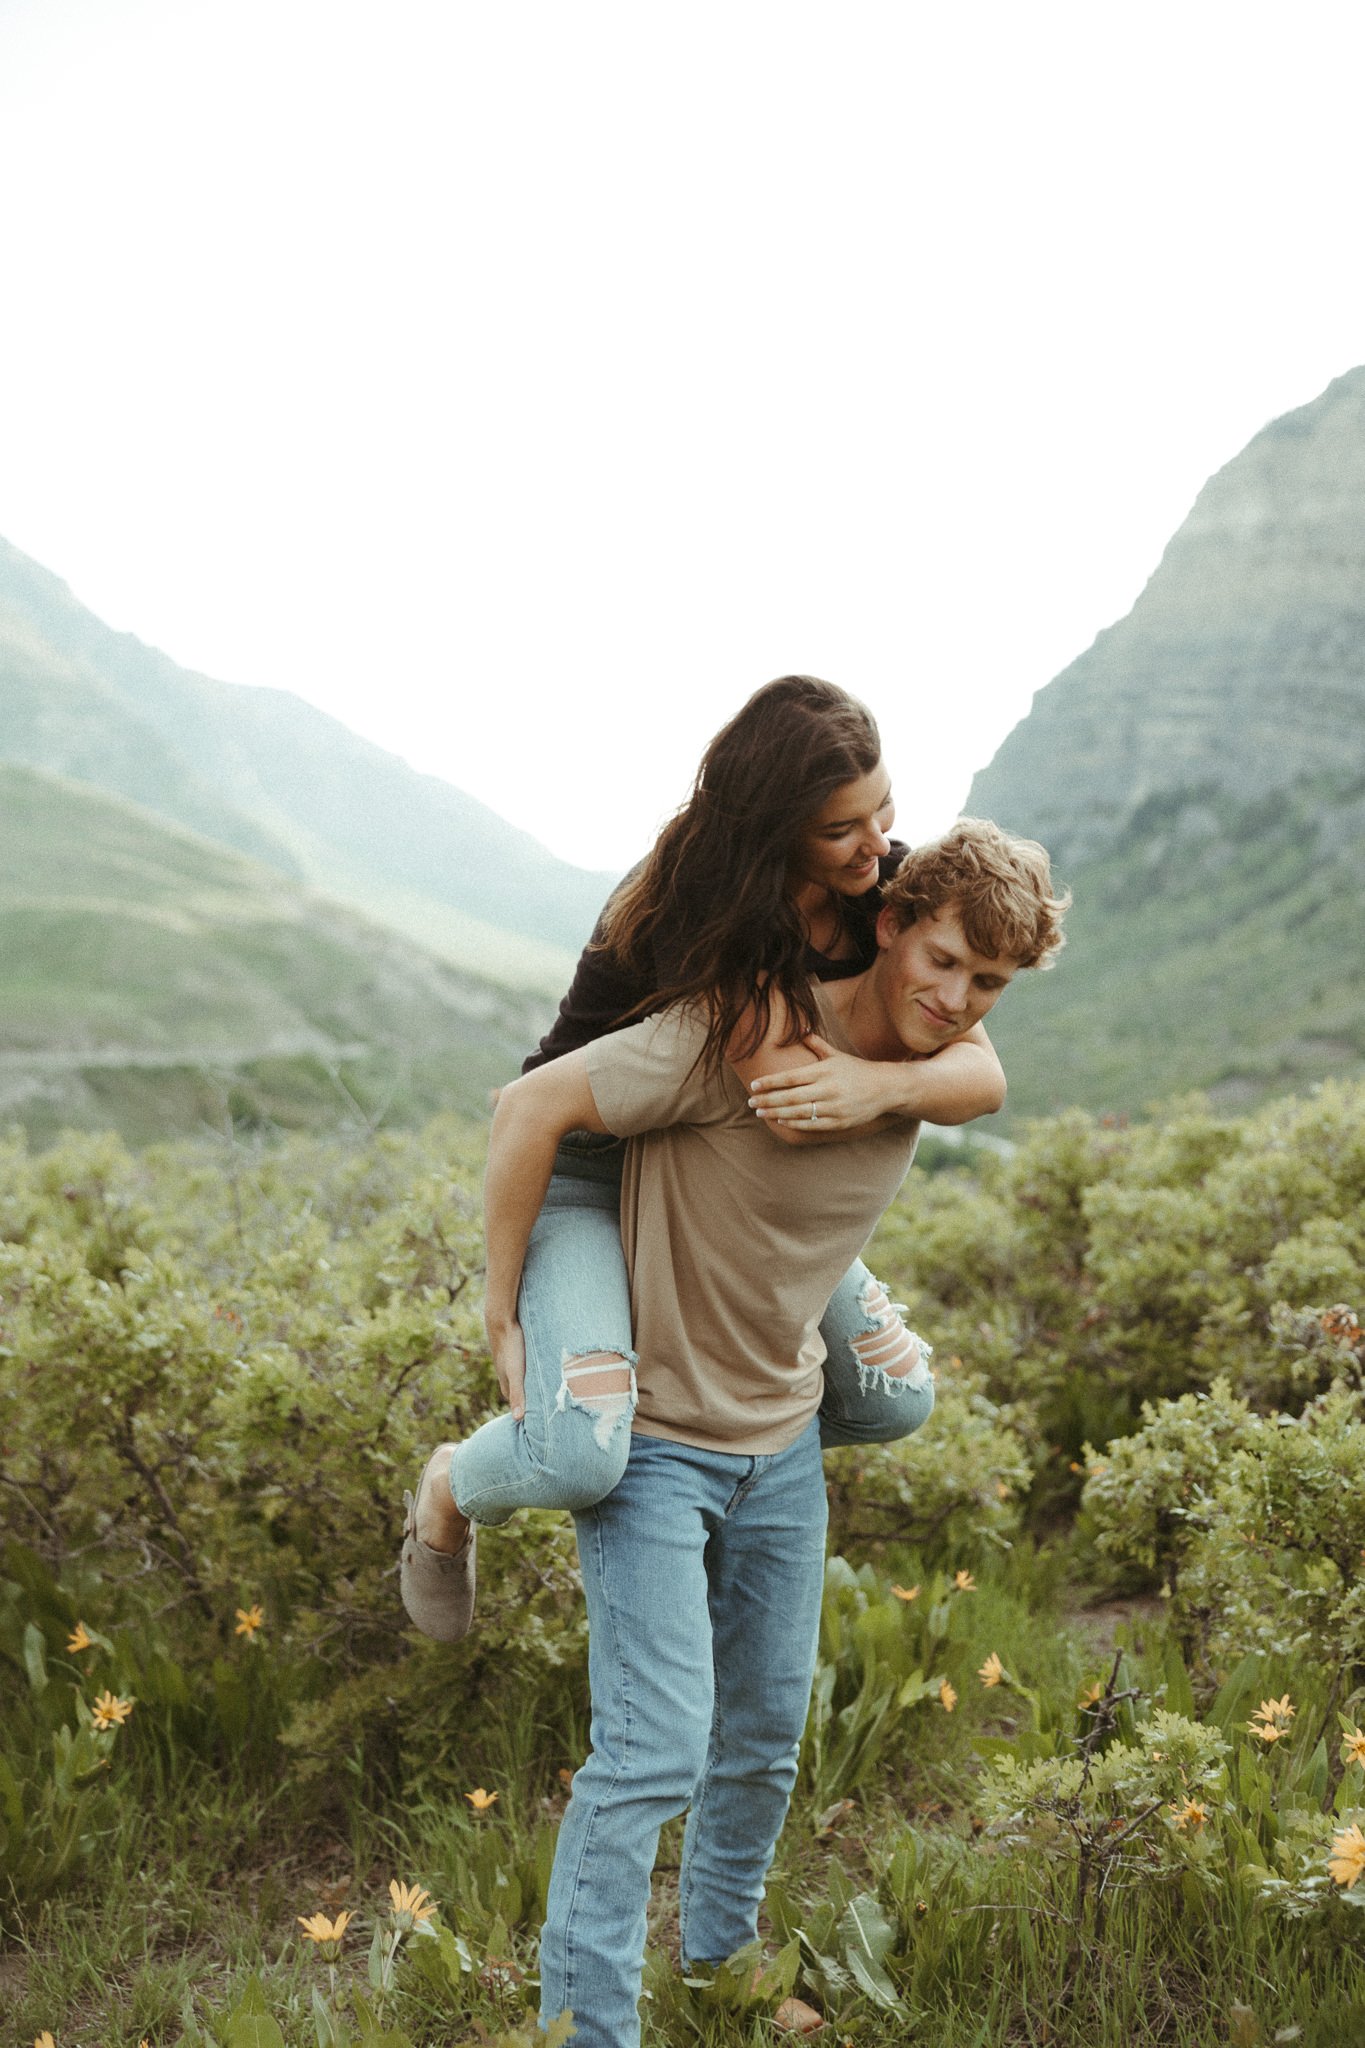 Spring-Provo-Canyon-Wildflowers-Engagement-Session-57